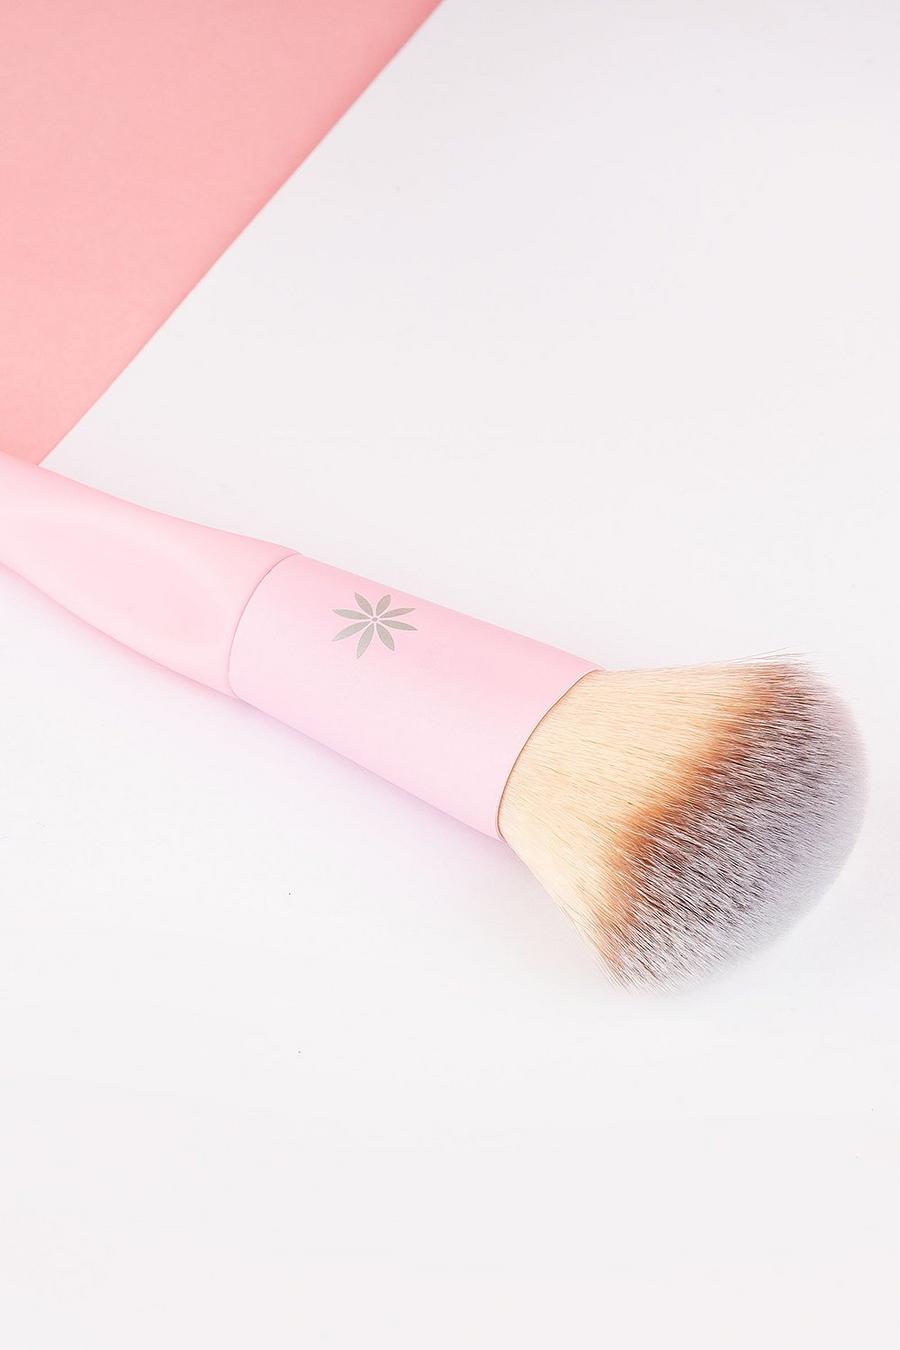 Brushworks - Pinceau à maquillage, Baby pink rose